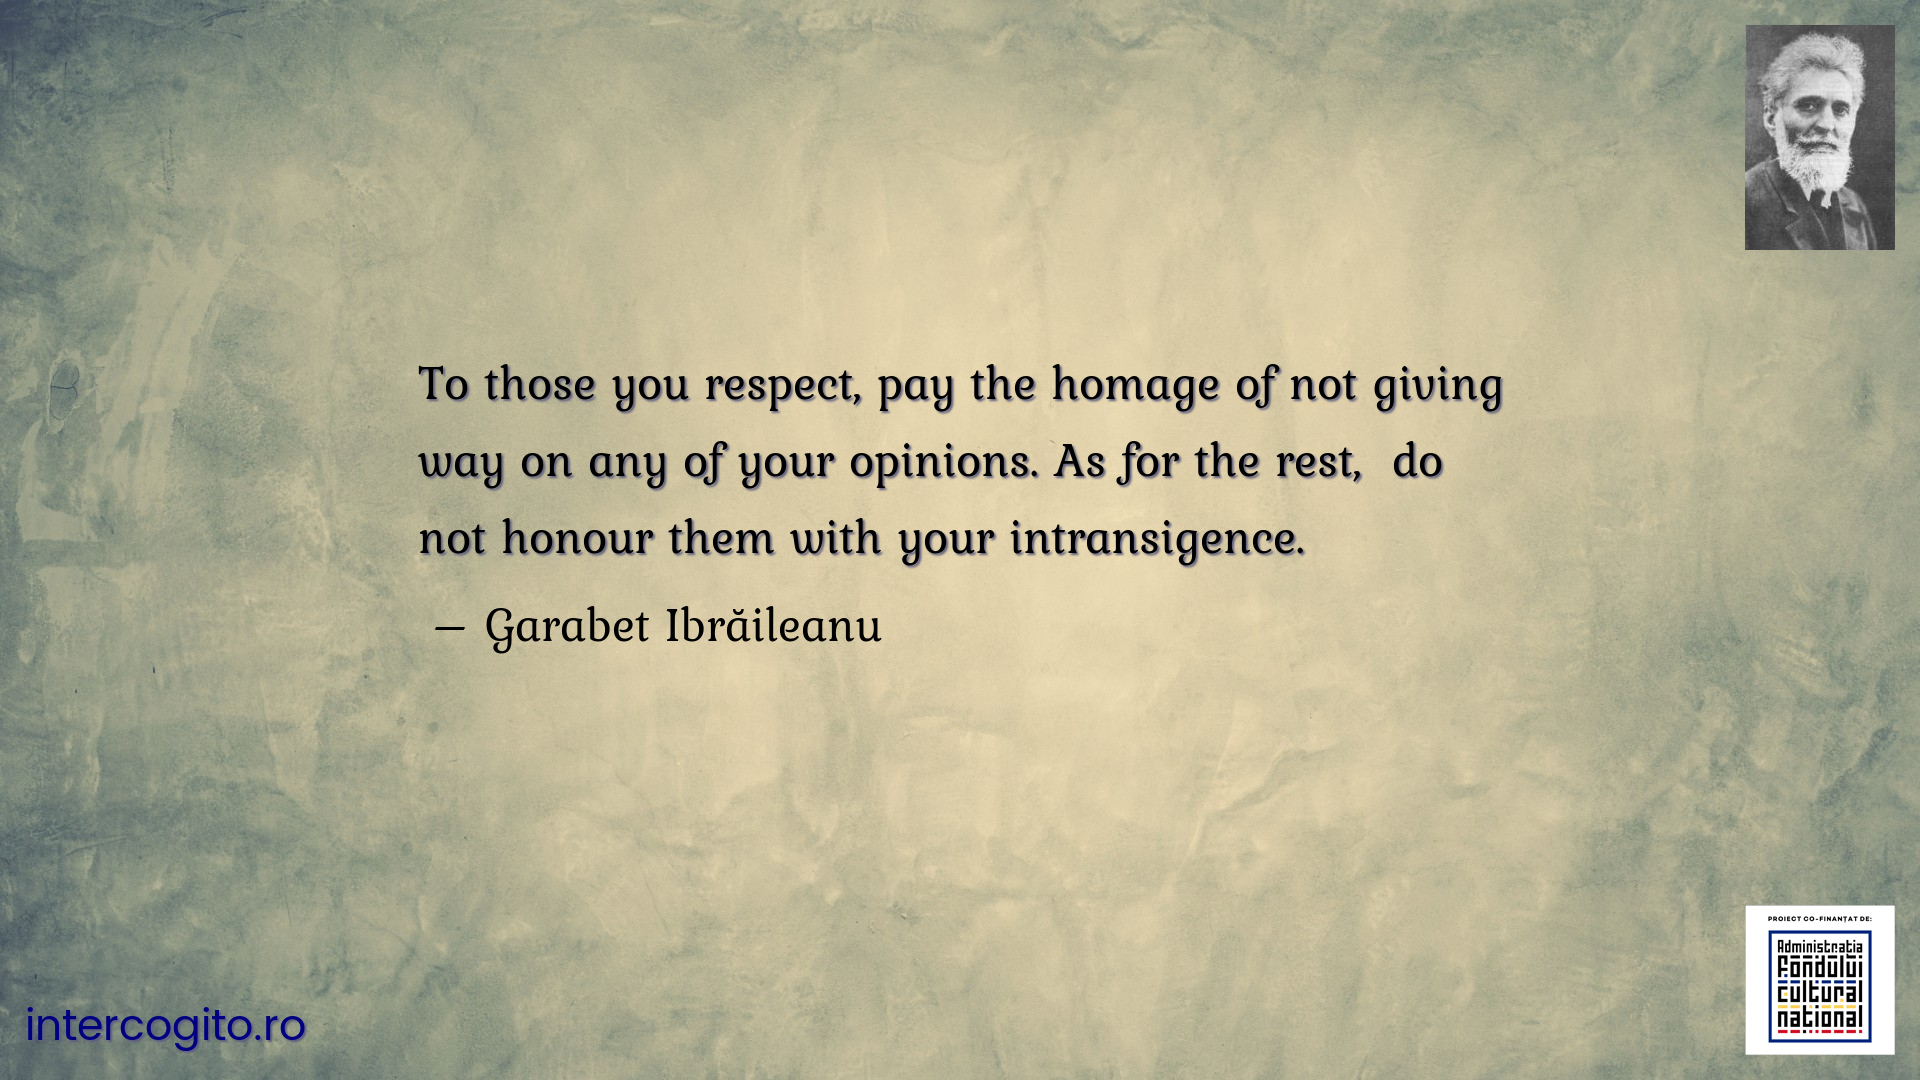 To those you respect, pay the homage of not giving way on any of your opinions. As for the rest,  do not honour them with your intransigence.